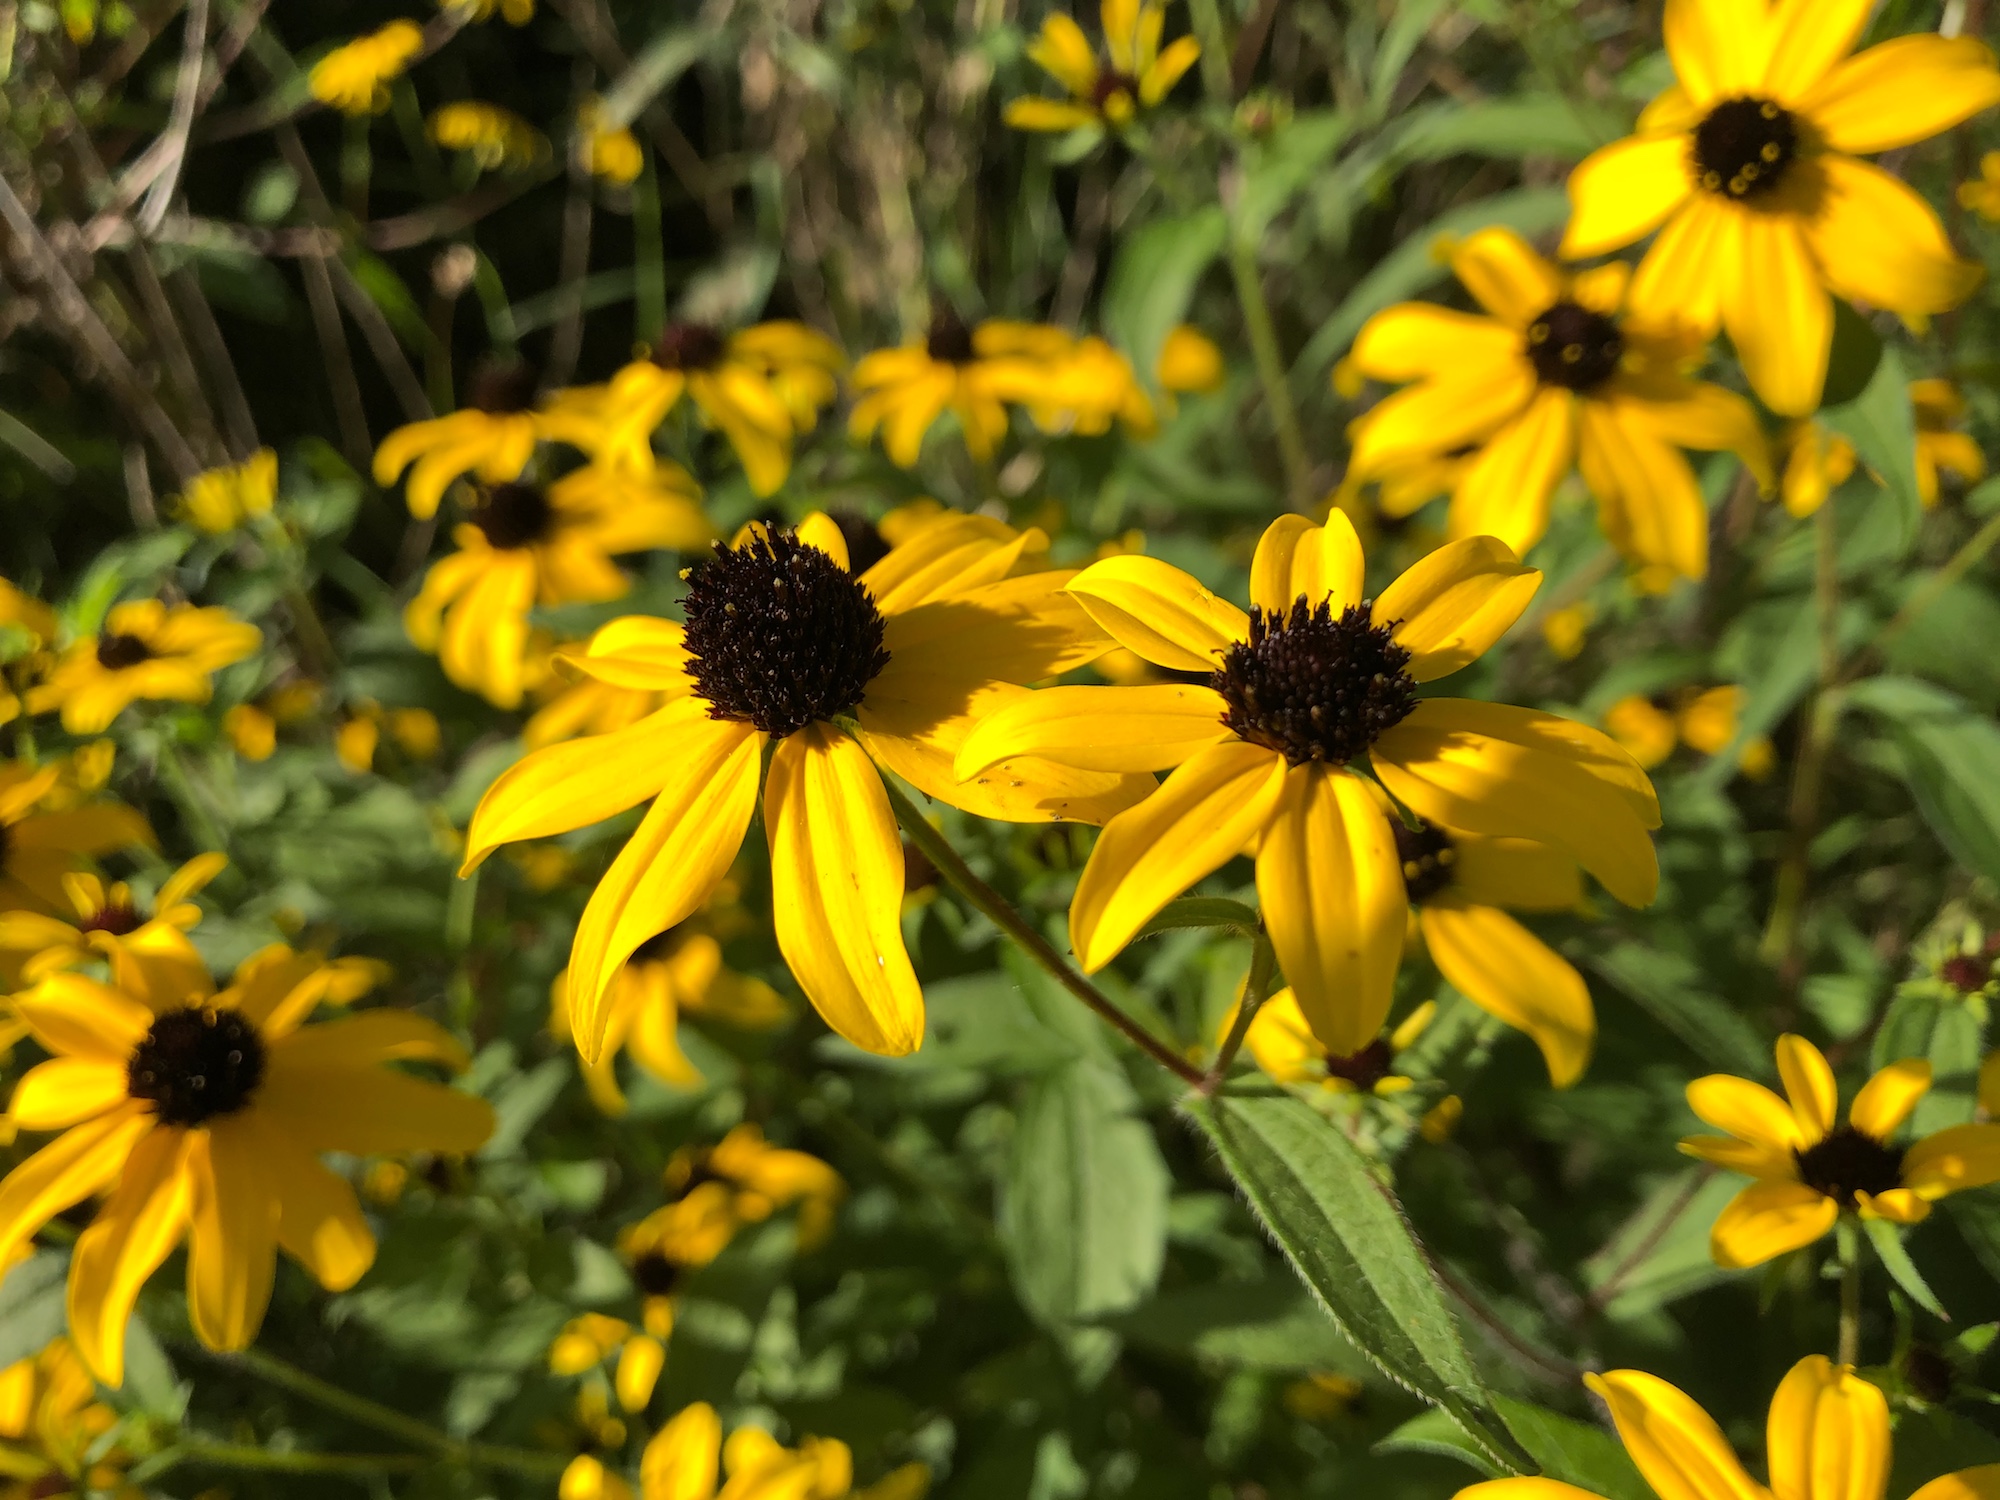 Brown-eyed Susan on bank of retaining pond in Madison, Wisconsin on August 28, 2019.